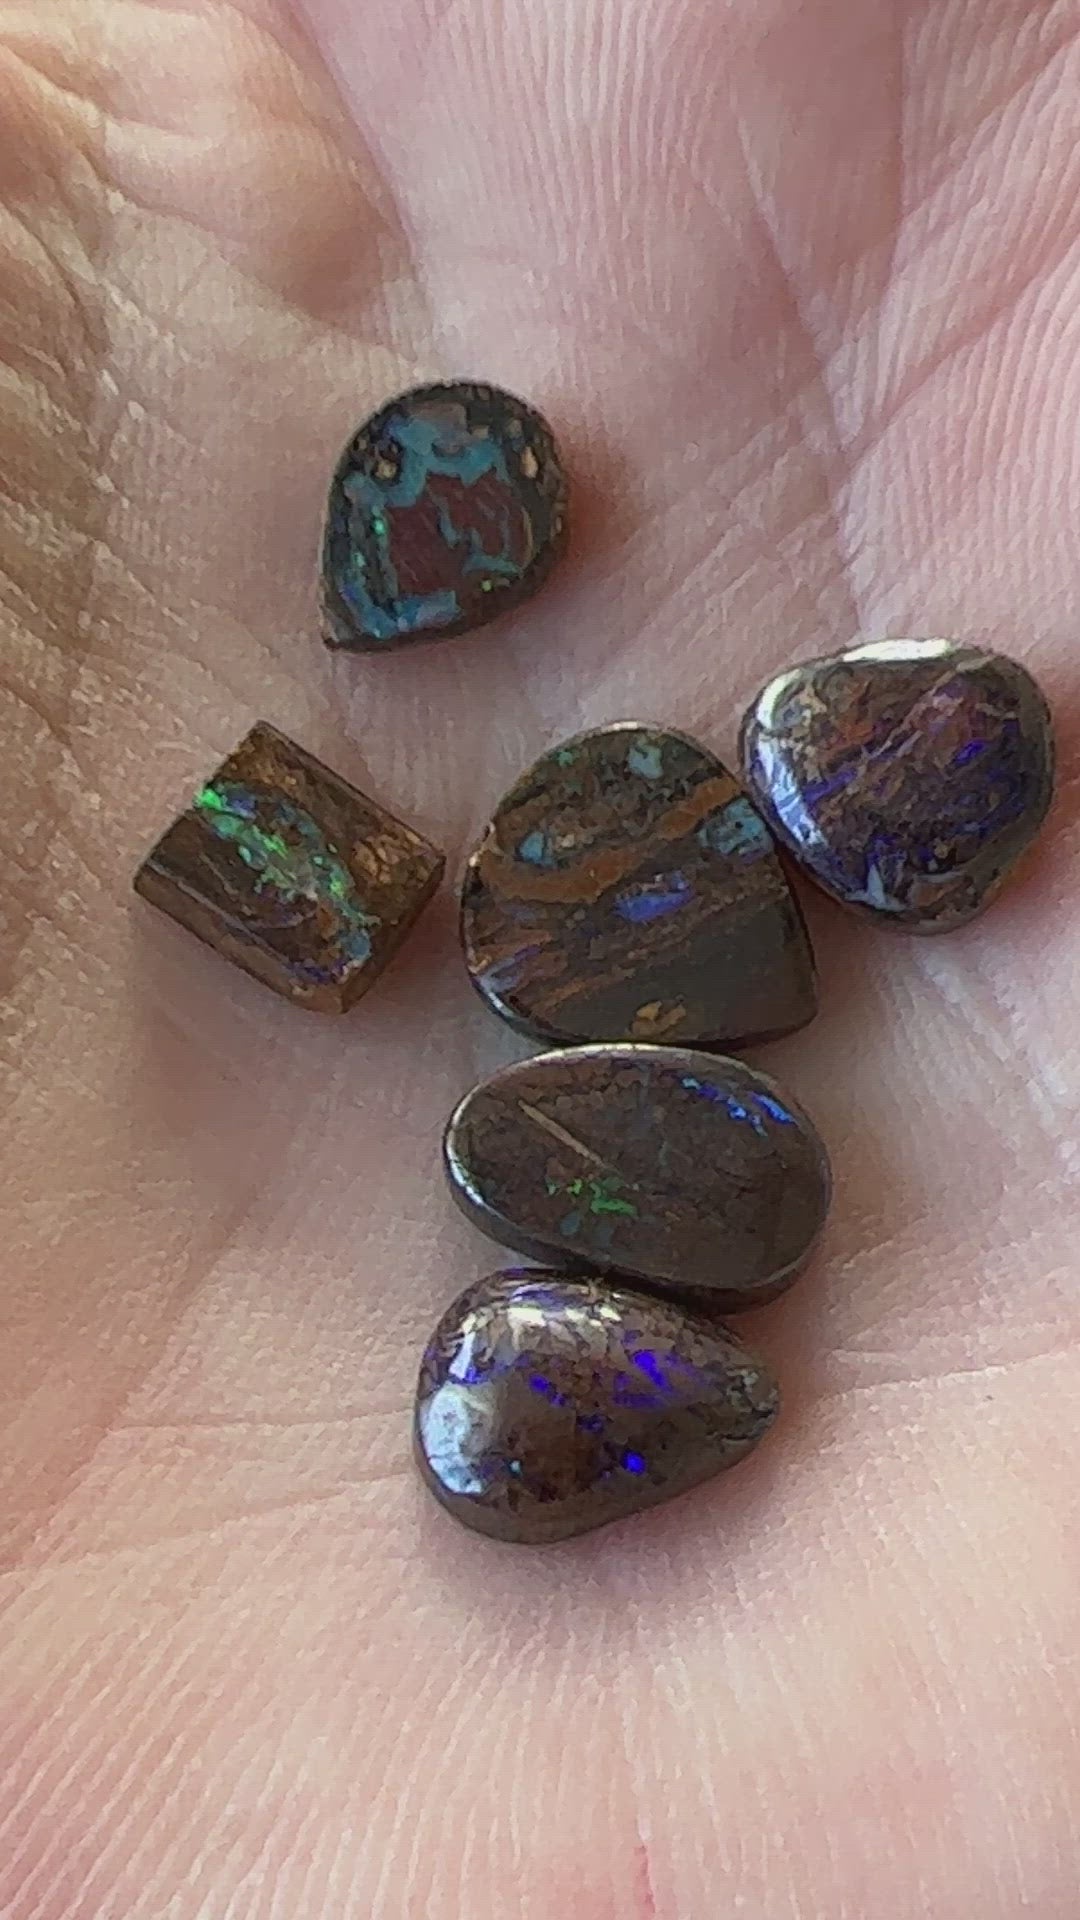 Six lovely boulder opals. Great little coloured pieces.